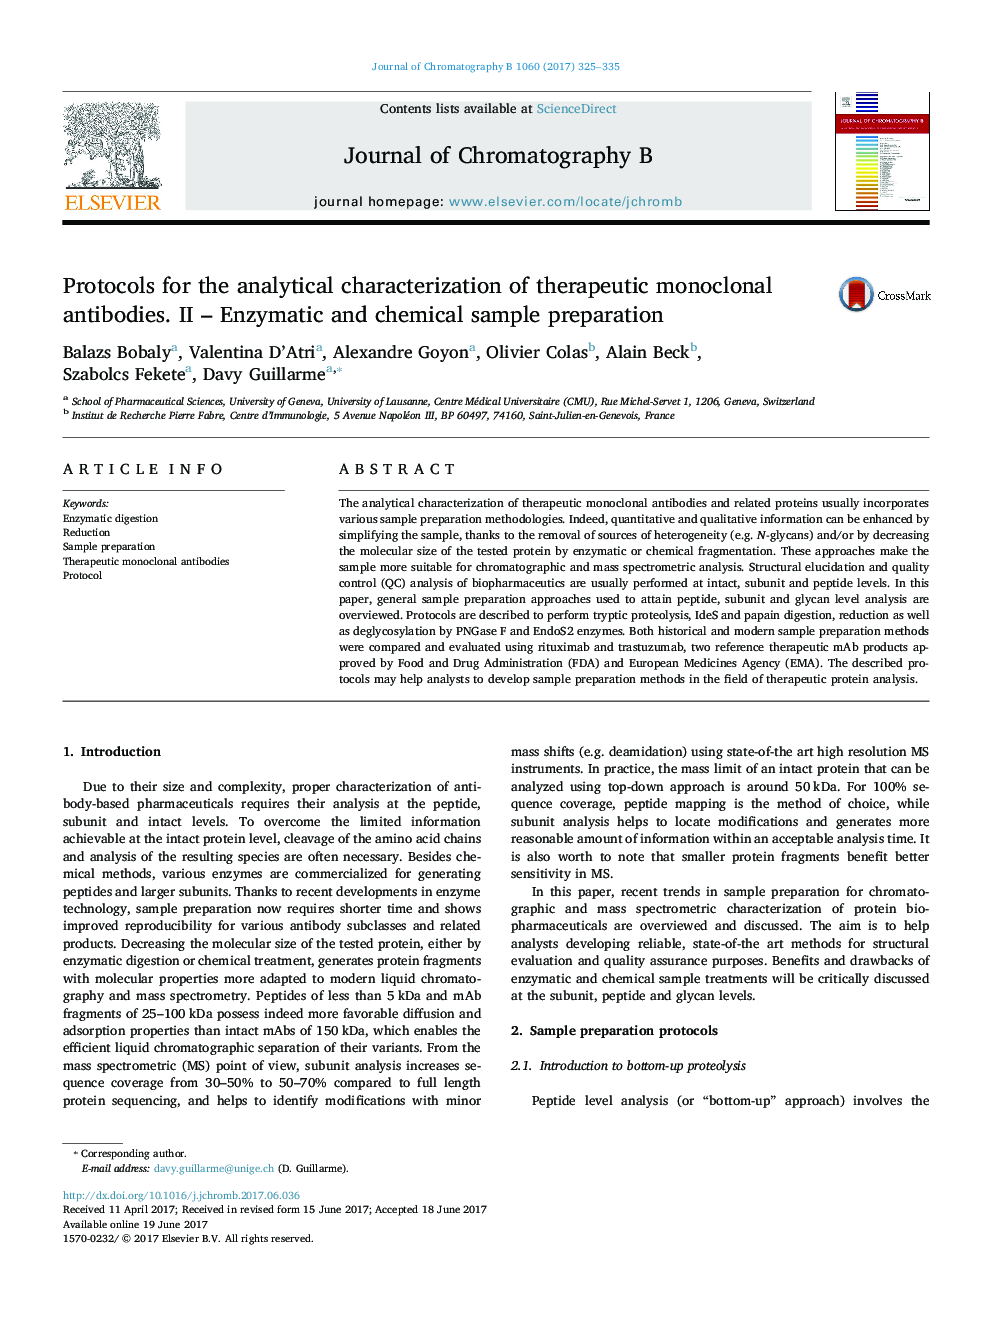 Protocols for the analytical characterization of therapeutic monoclonal antibodies. II - Enzymatic and chemical sample preparation